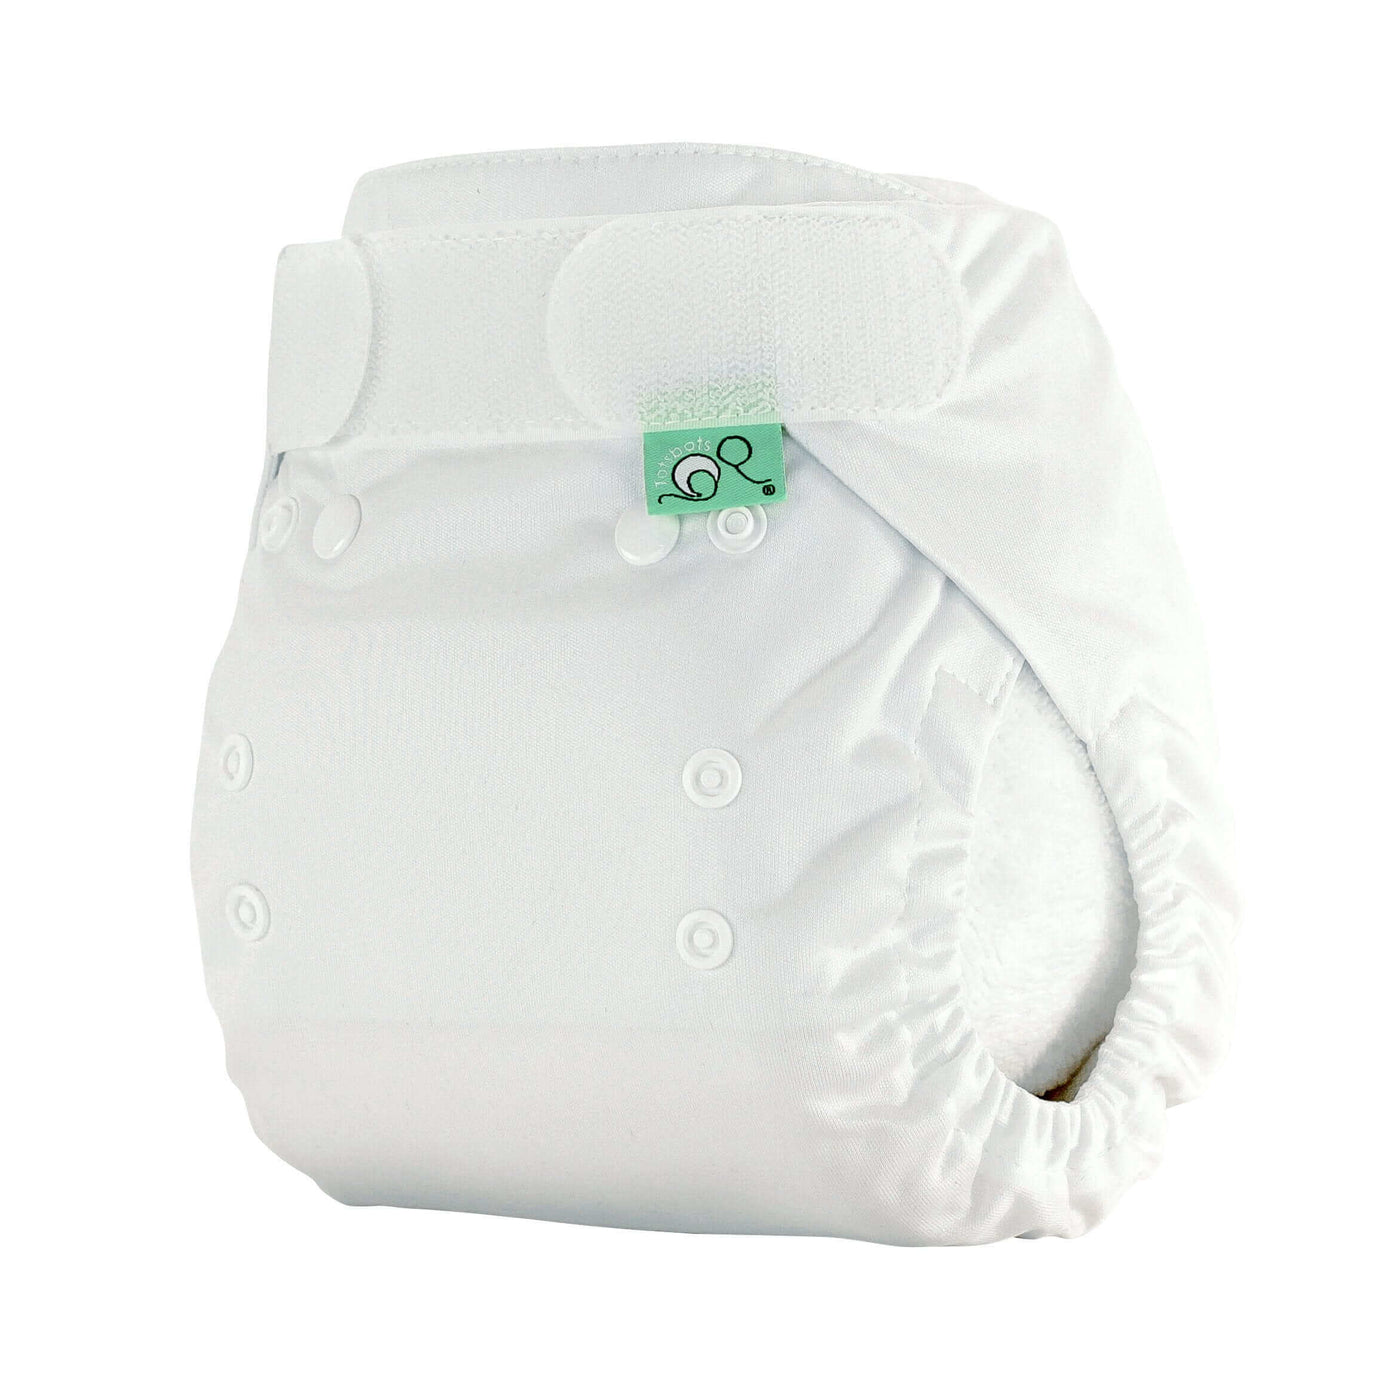 Tots Bots Bamboozle Nappy Wrap Colour: White Size: Size 3 (35lbs+) reusable nappies Earthlets